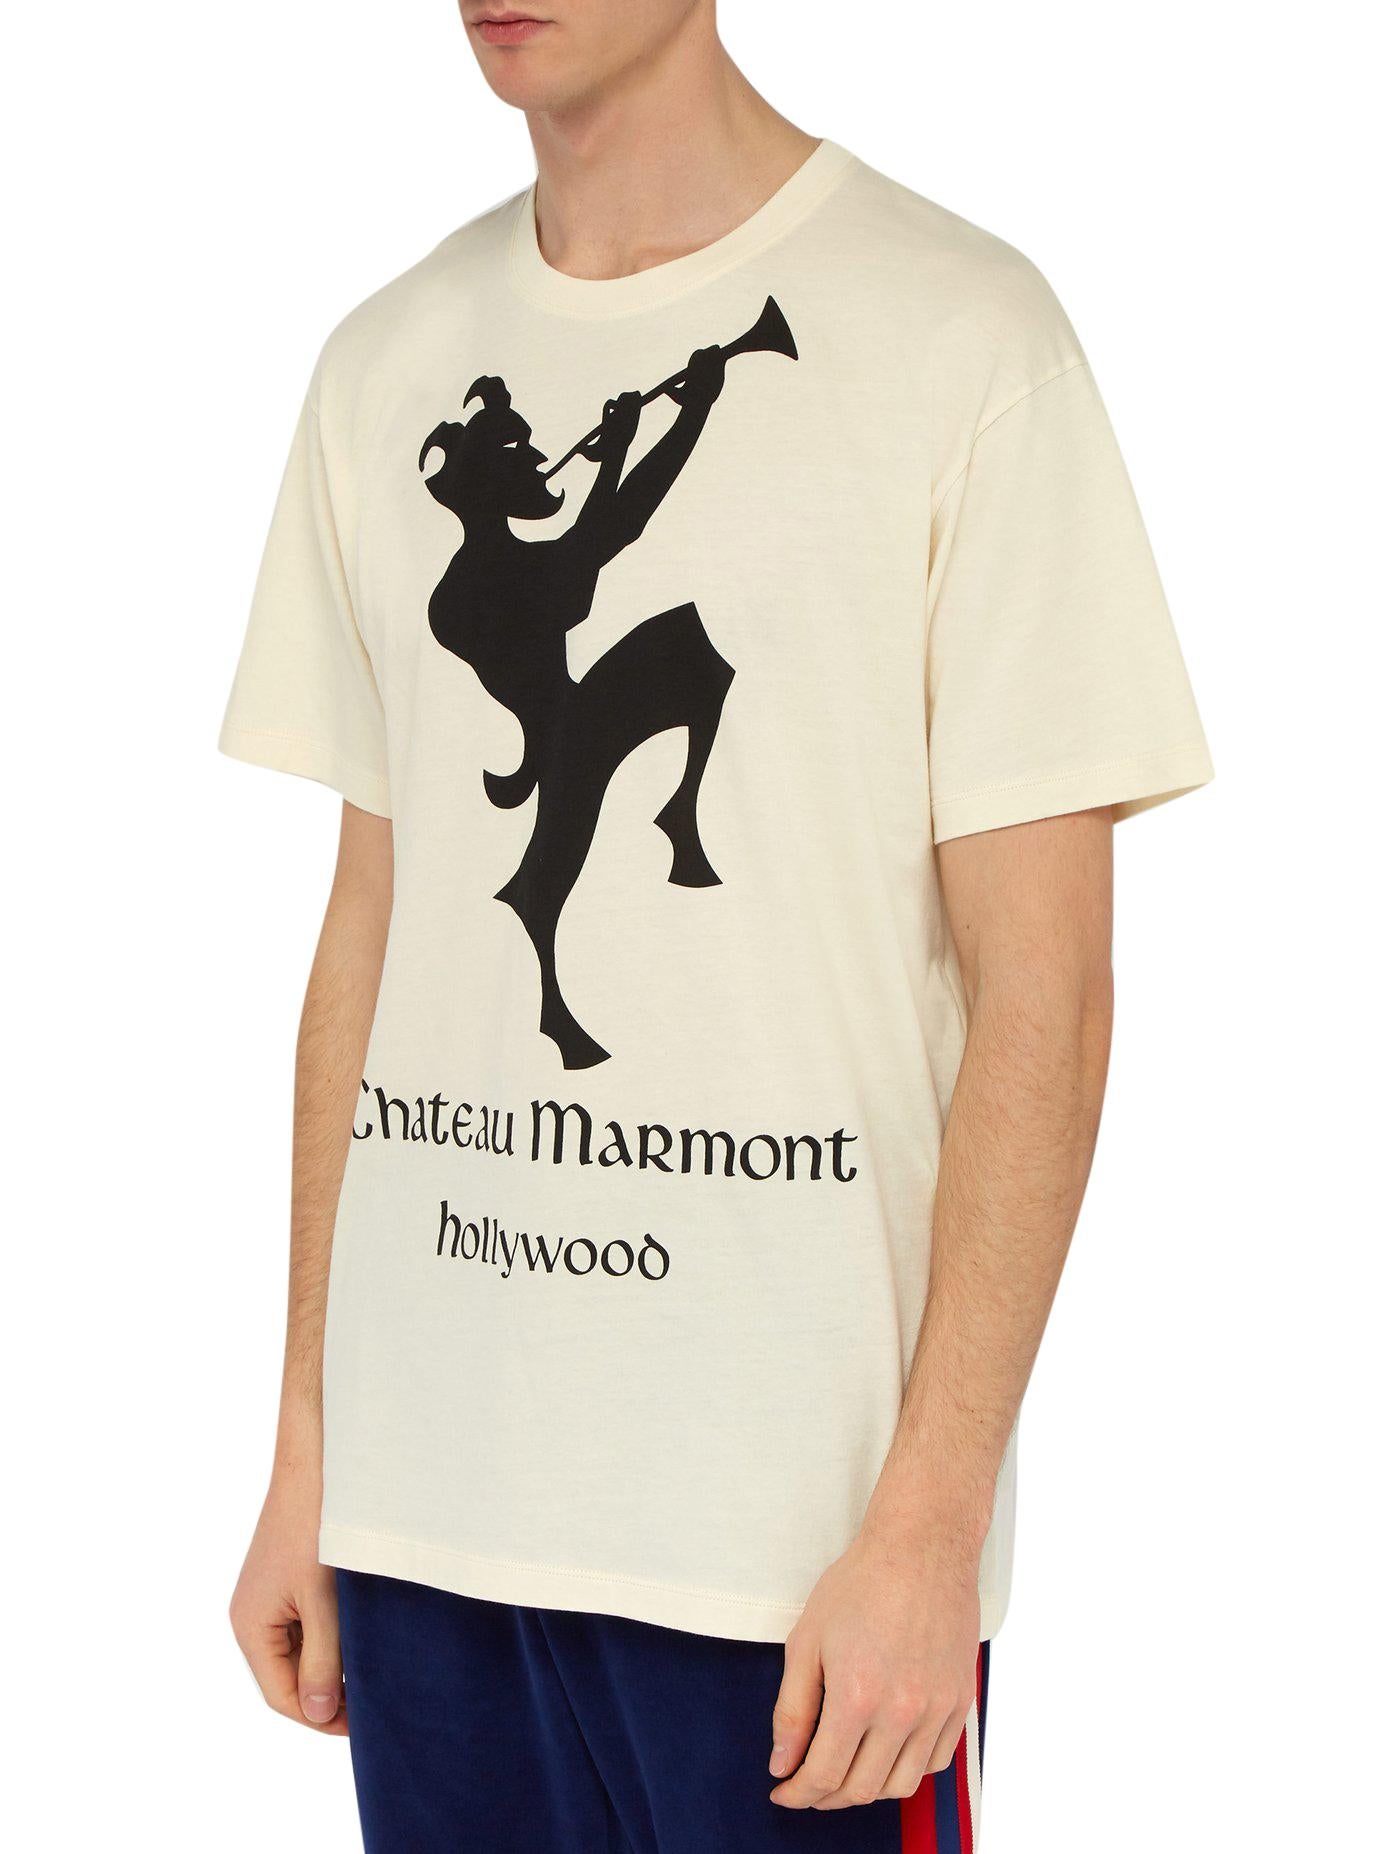 Gucci Runway Chateau Marmont T-shirt - New Season US 4 For Sale at 